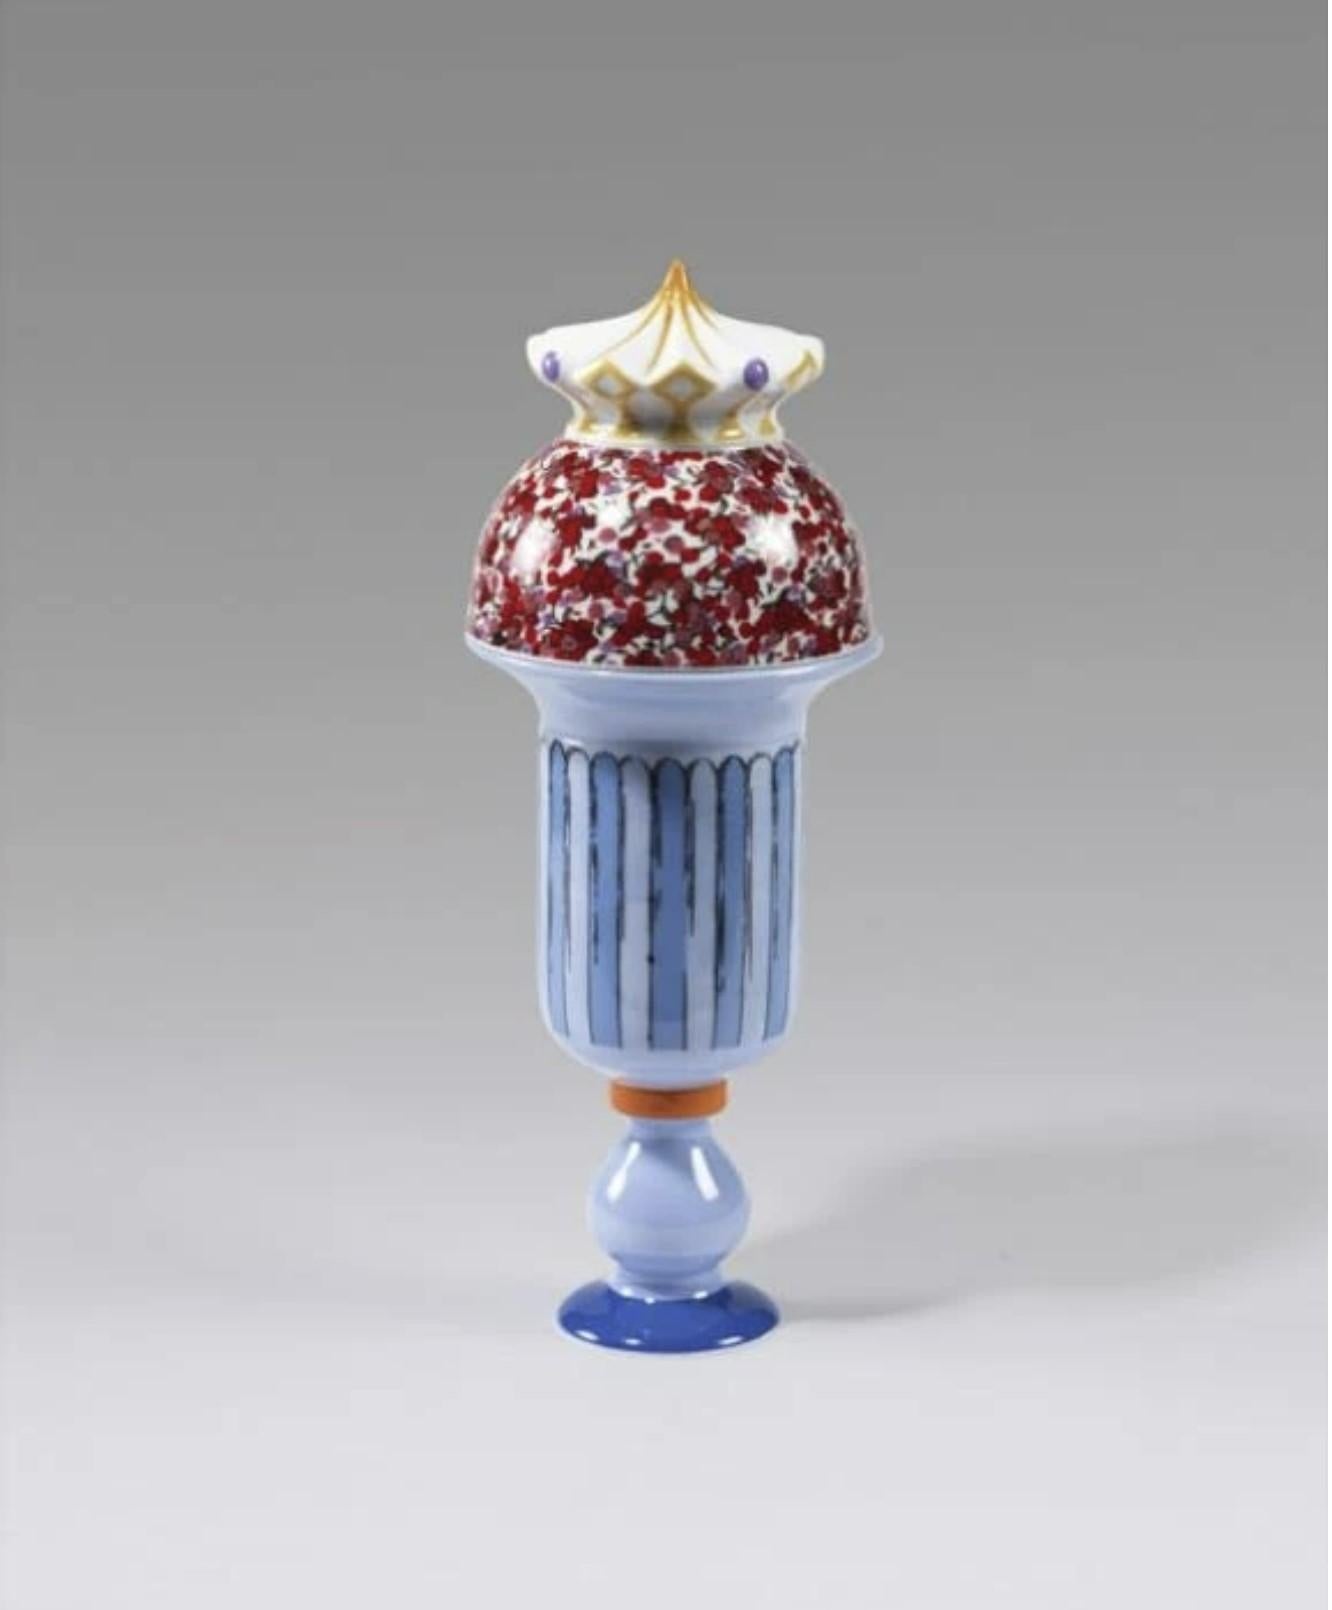 Andy Warhol
So Sweet Sundae
2003
Enamel on porcelain
12 × 33 × 12 cm
(4.7 × 13 × 4.7 in)
Signed in glaze, numbered on the reverse. In wooden box, accompained by certificate from the Rosenthal Studio
Edition 27 of 99
In mint condition


Although best